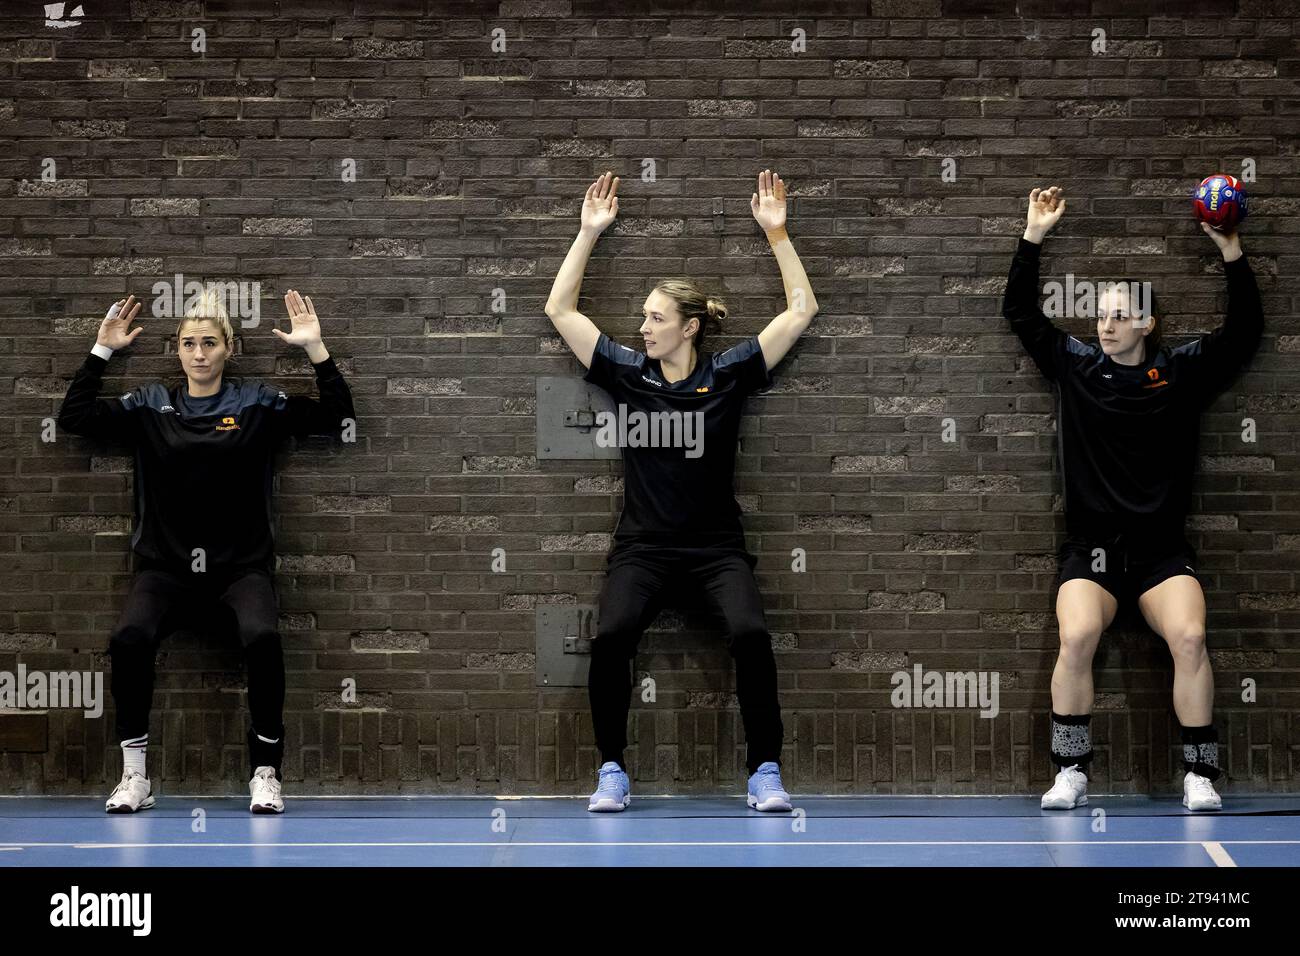 ARNHEM - Estavana Polman (l) and Lois Abbingh (m) during the training of the women's handball team for the World Cup. The World Cup is held in Denmark, Norway and Sweden. ANP ROBIN VAN LONKHUIJSEN Stock Photo